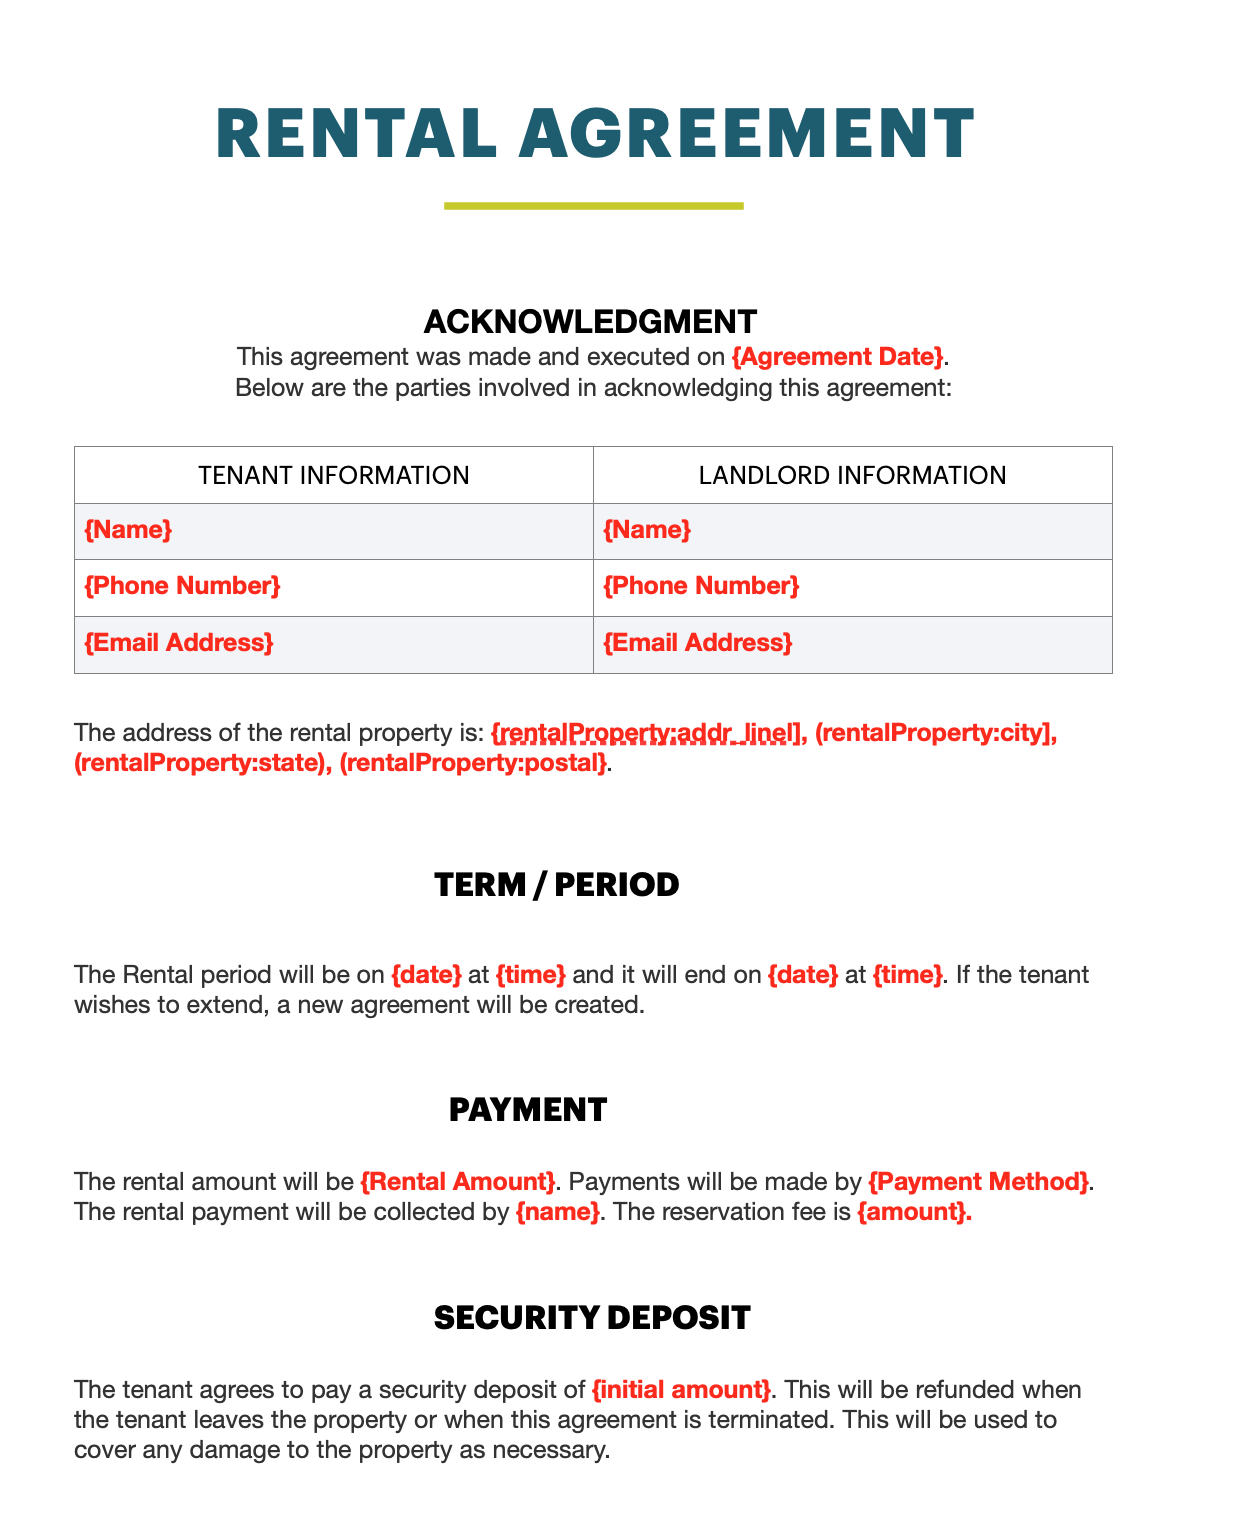 rental-arbitrage-contract-agreement-free-downloadable-templates-airbtics-airbnb-analytics